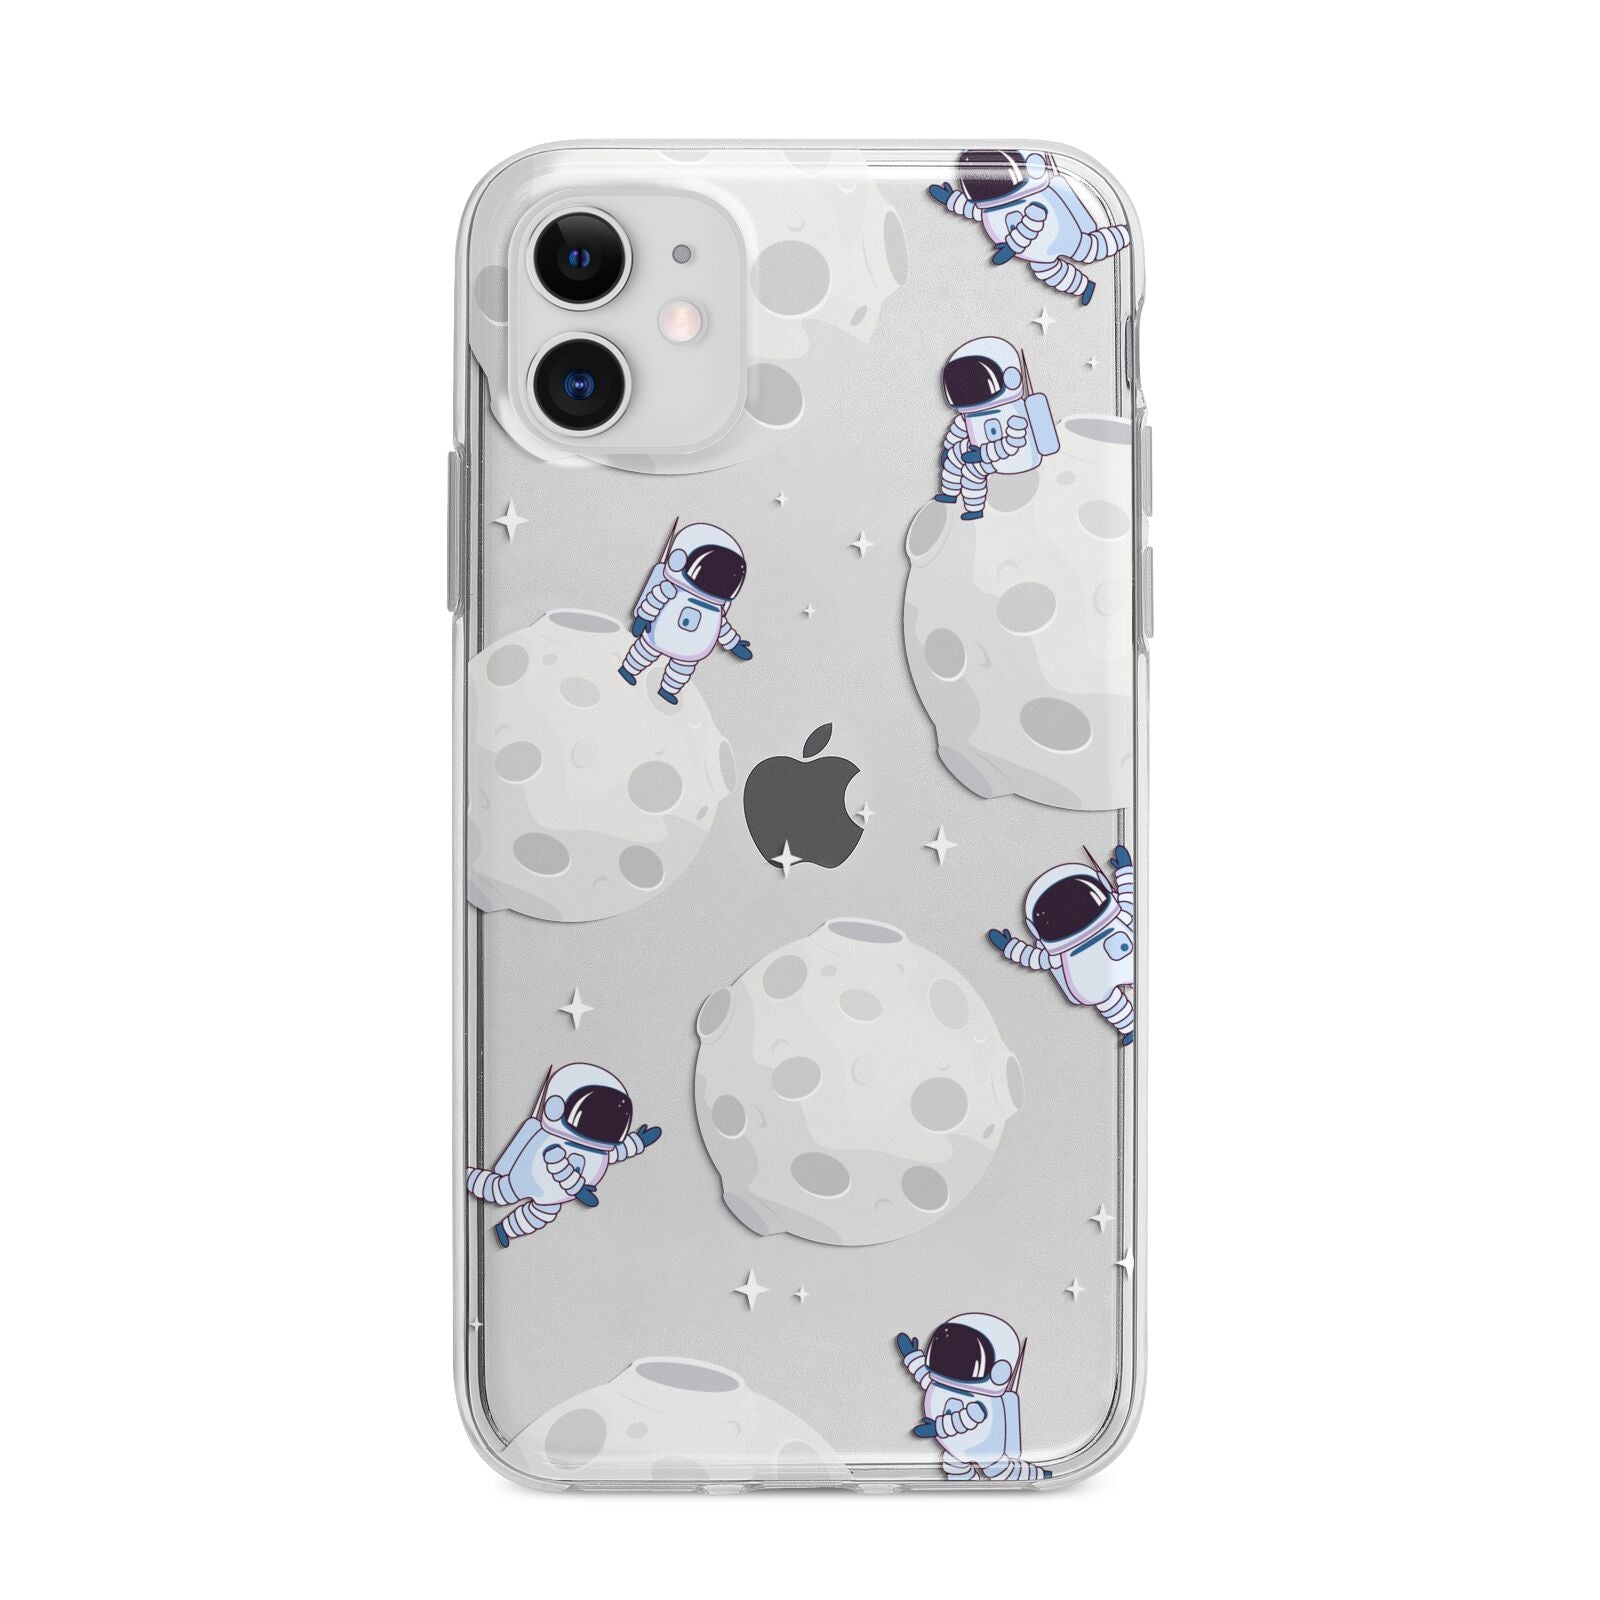 Astronauts and Asteroids Apple iPhone 11 in White with Bumper Case